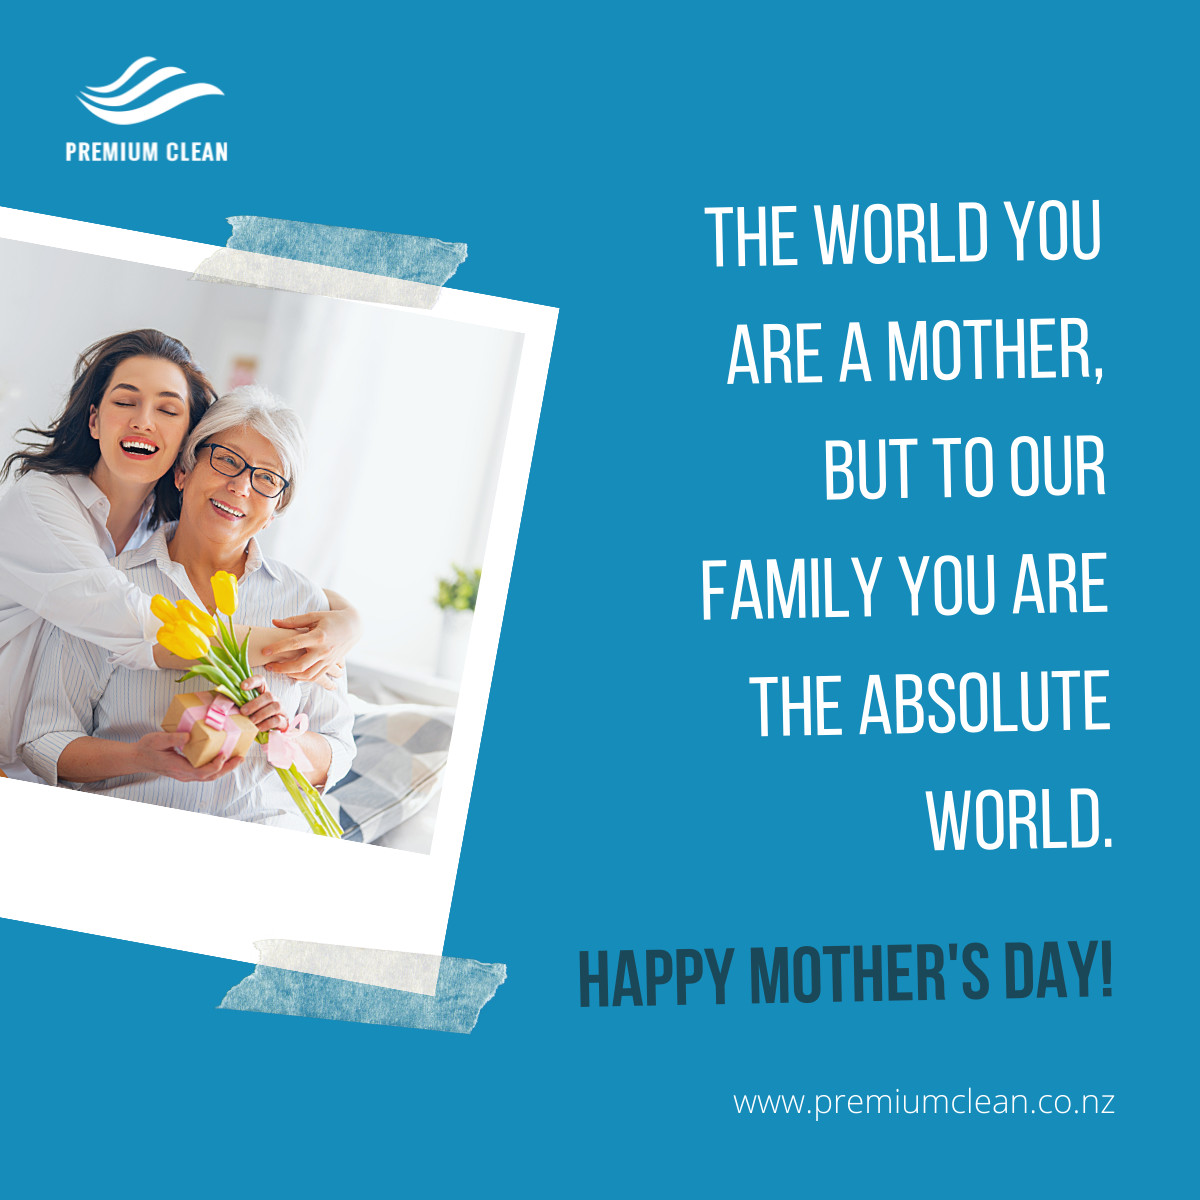 Happy Mother's Day to all the wonderful moms out there! Let's all cherish all the mom-ents with our beloved mothers. ♥  

#premiumclean #premiumcleannz #happymothersday #mothersday #mothersday2022